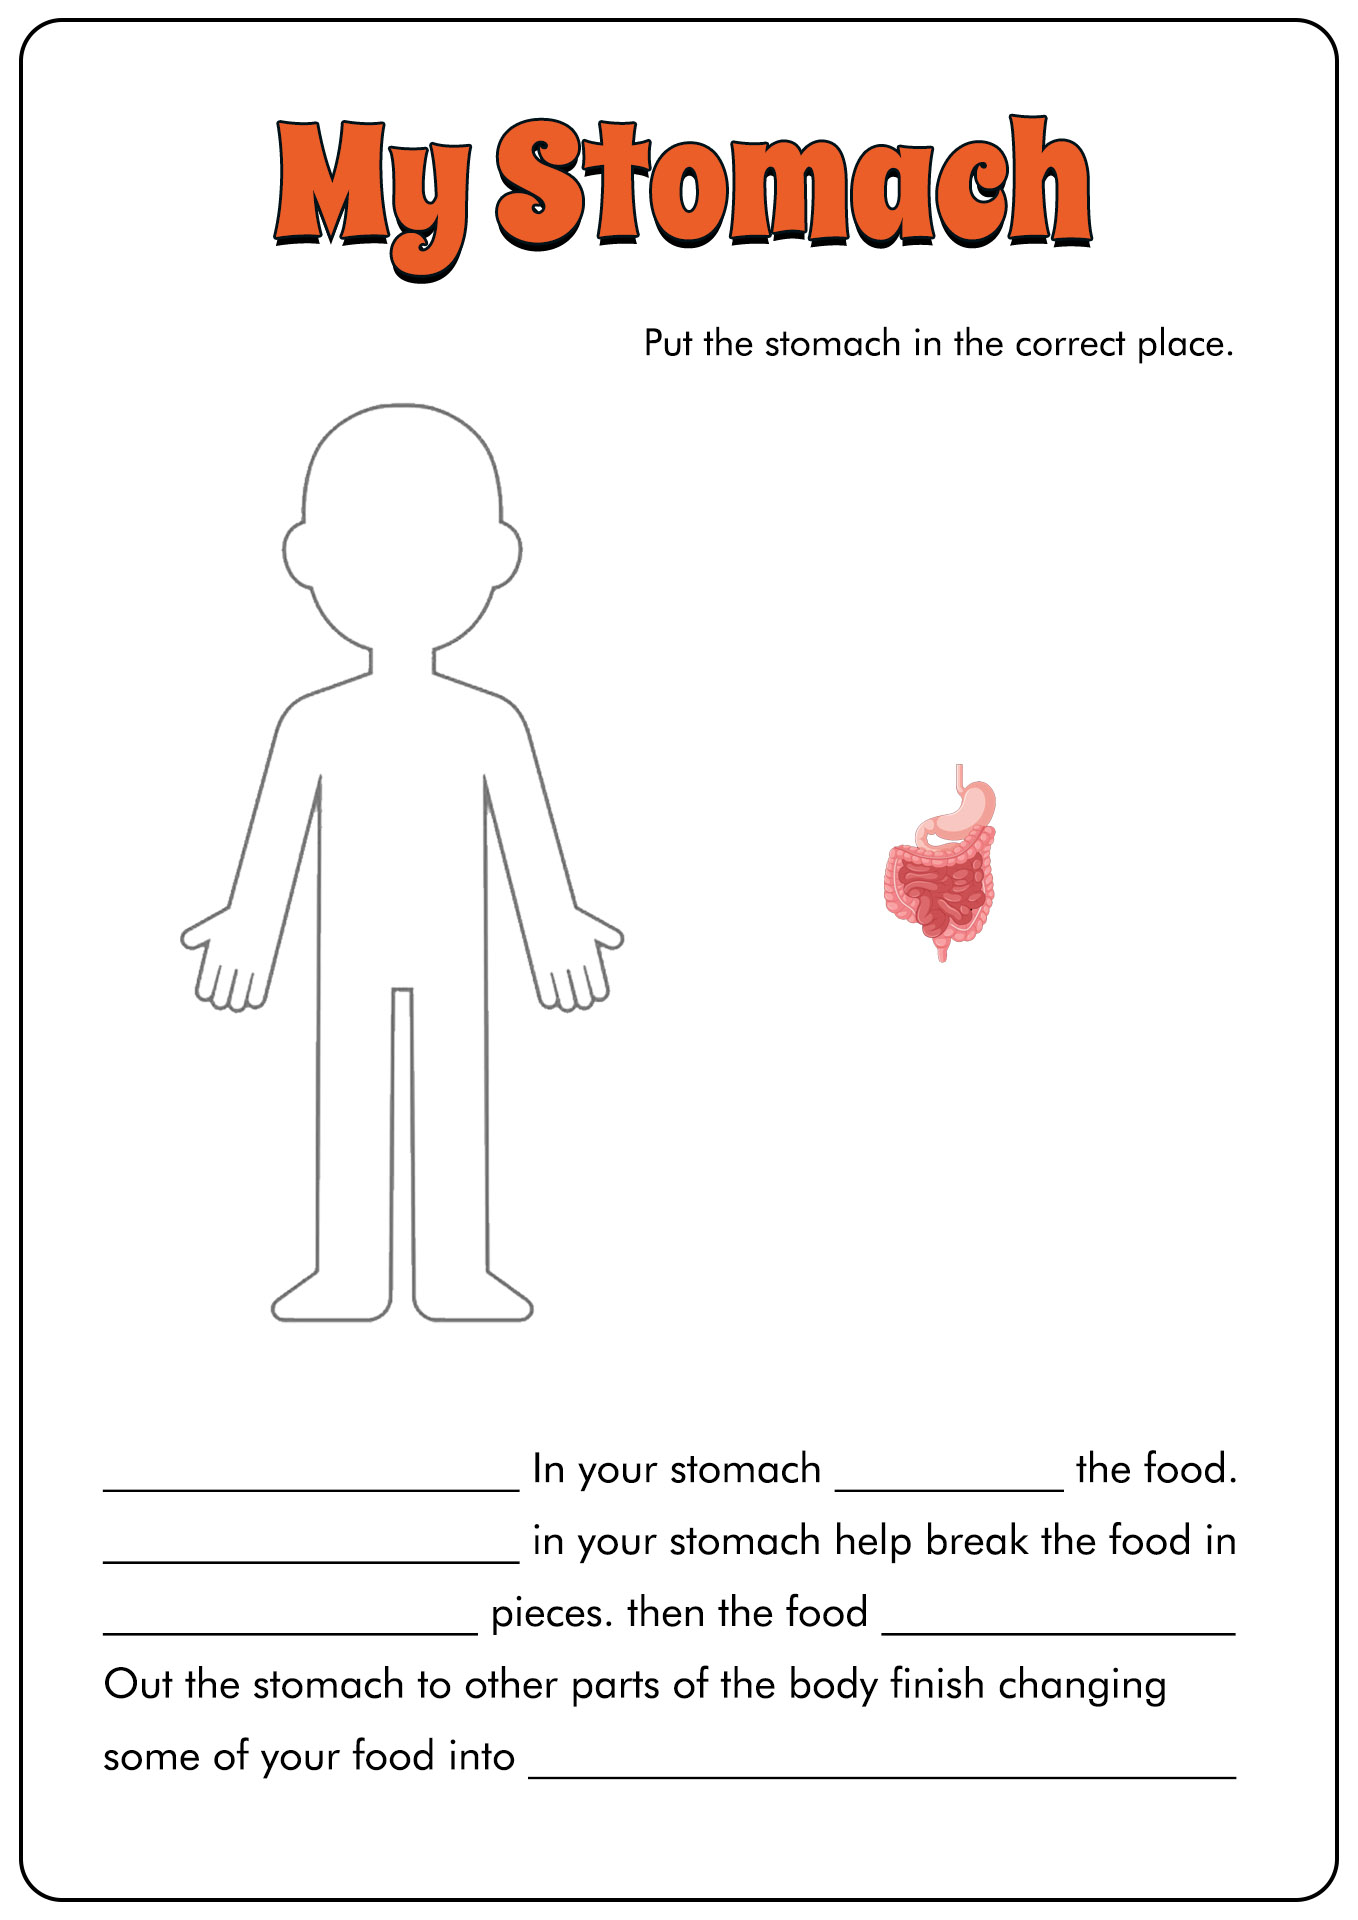 14 Best Images of Urinary System Worksheets Blank